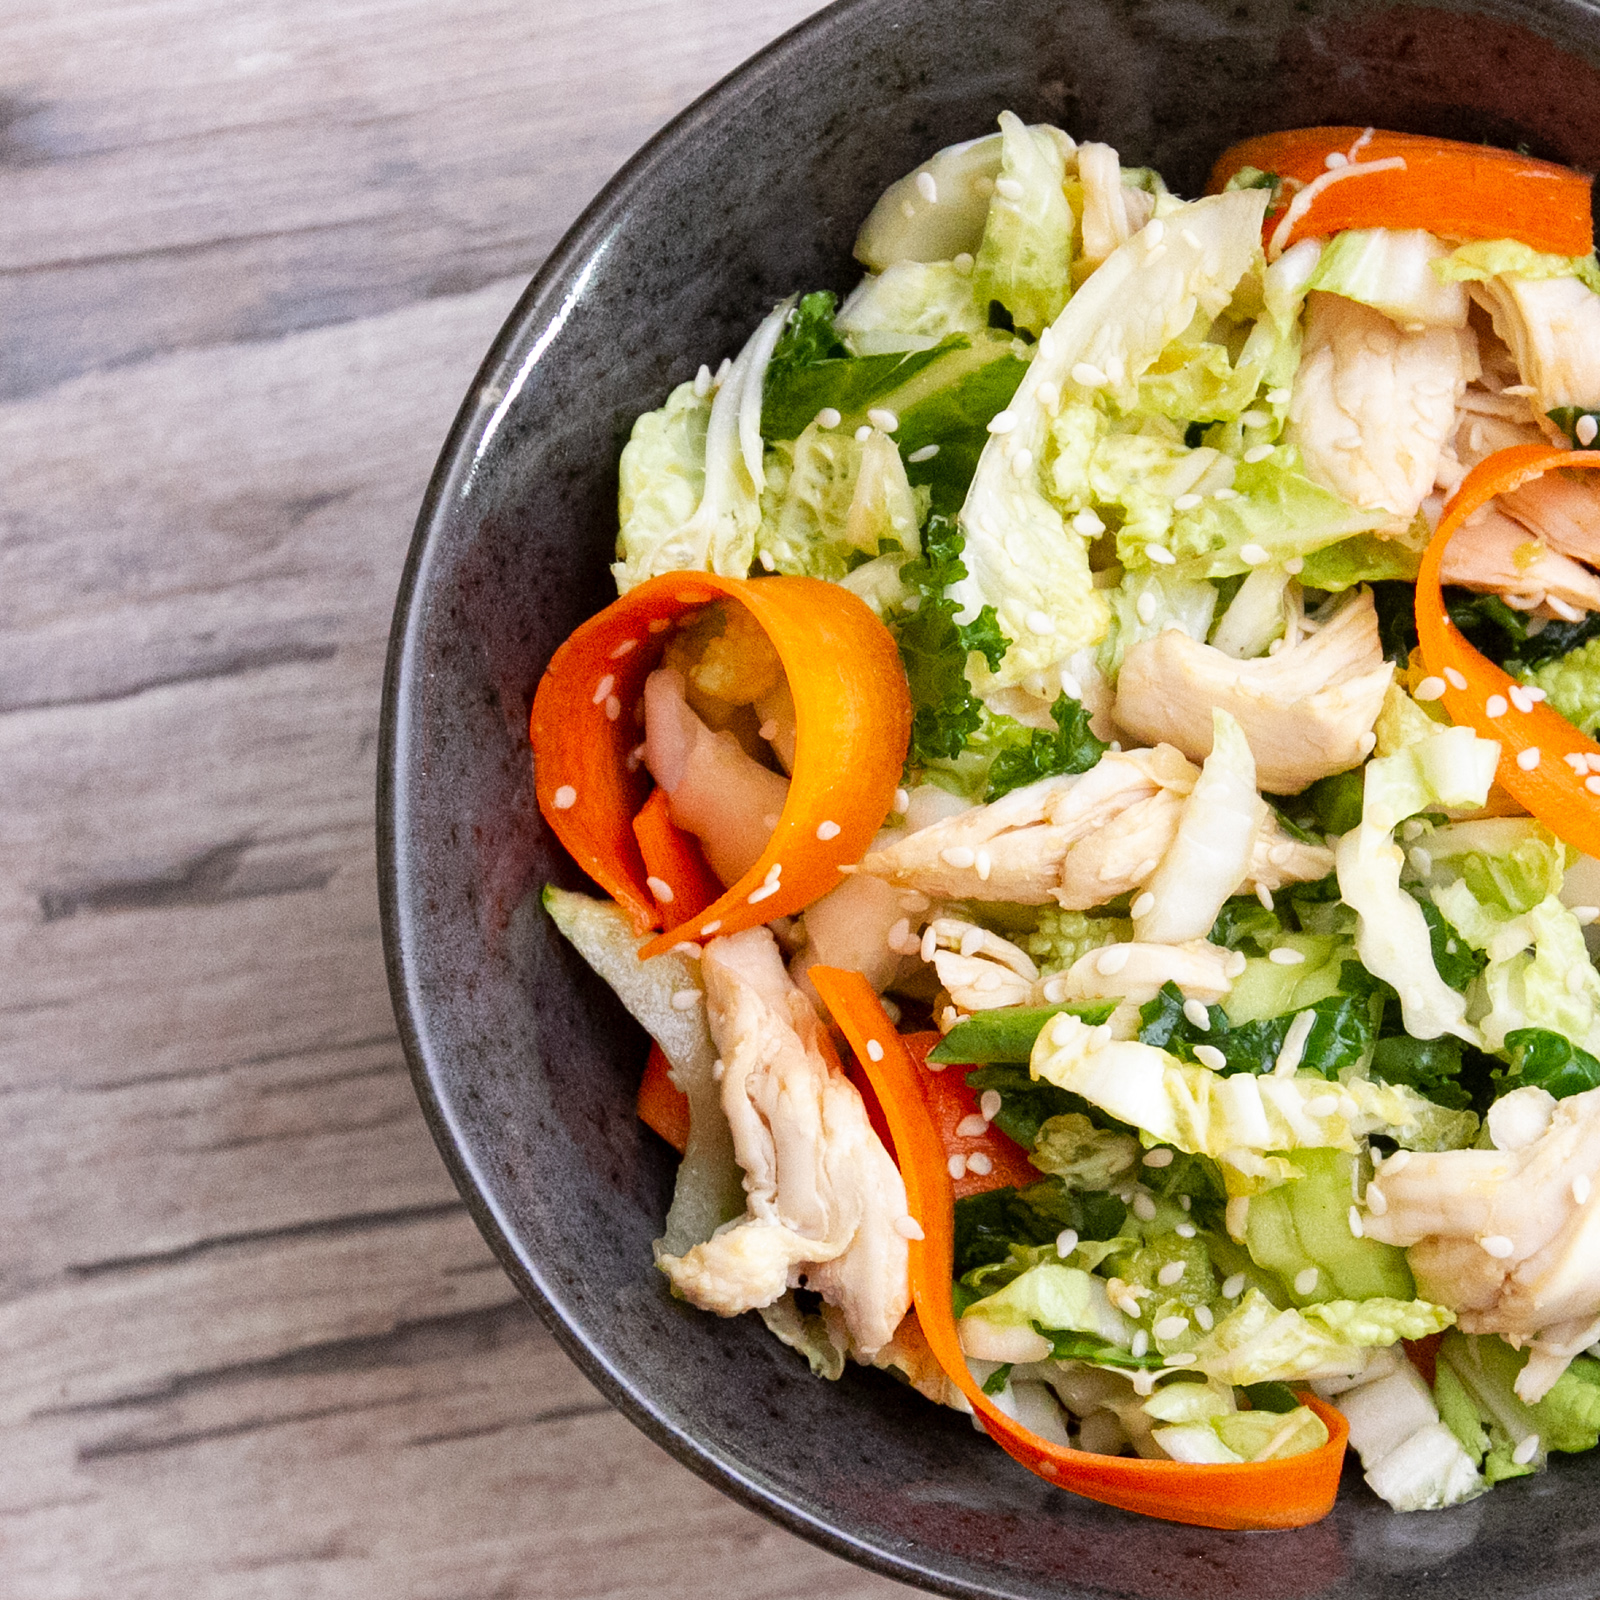 Napa Cabbage &amp; Chicken Salad With Toasted Sesame Dressing